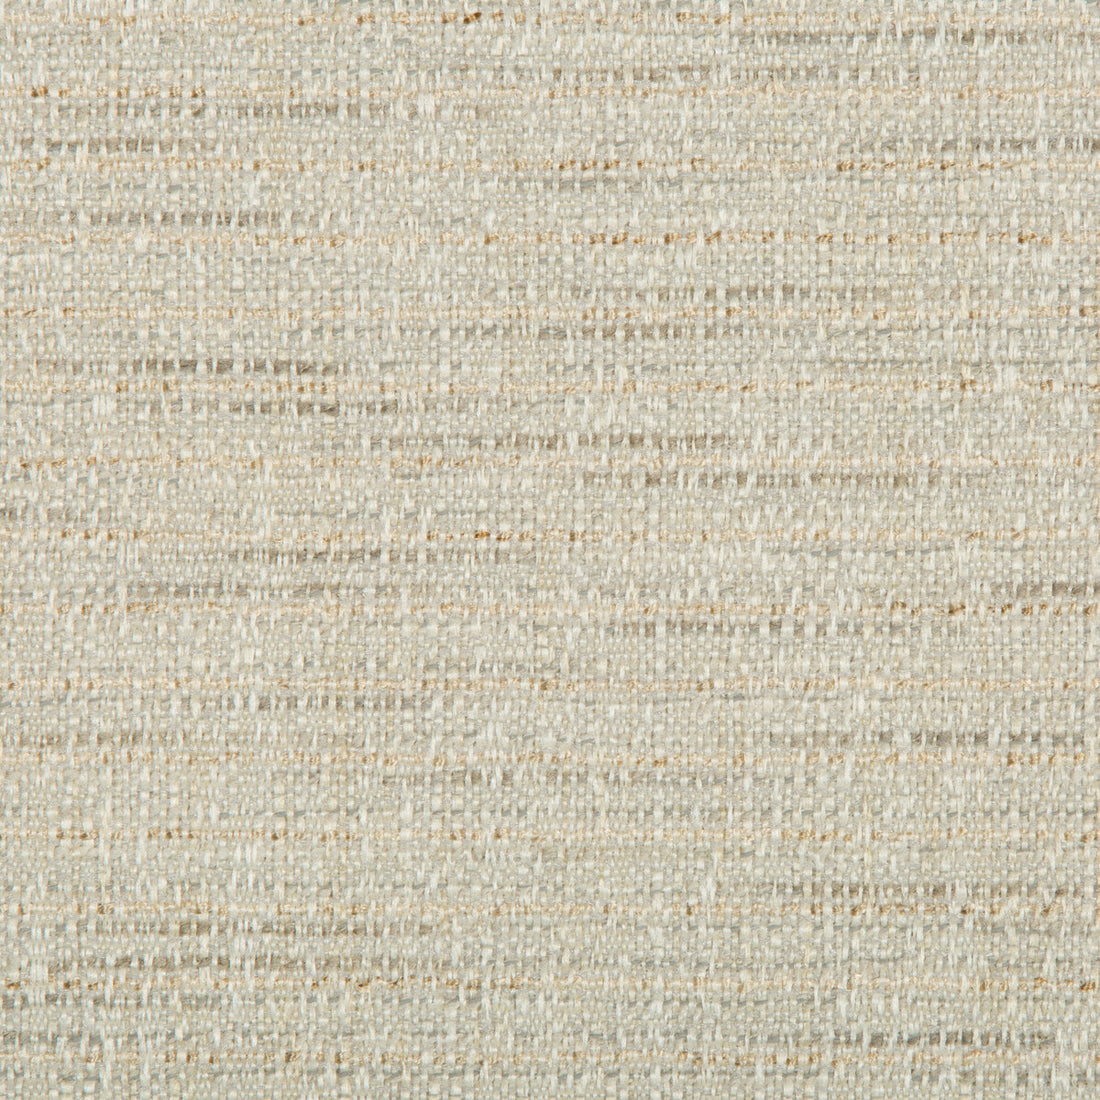 Kravet Contract fabric in 35410-11 color - pattern 35410.11.0 - by Kravet Contract in the Crypton Incase collection